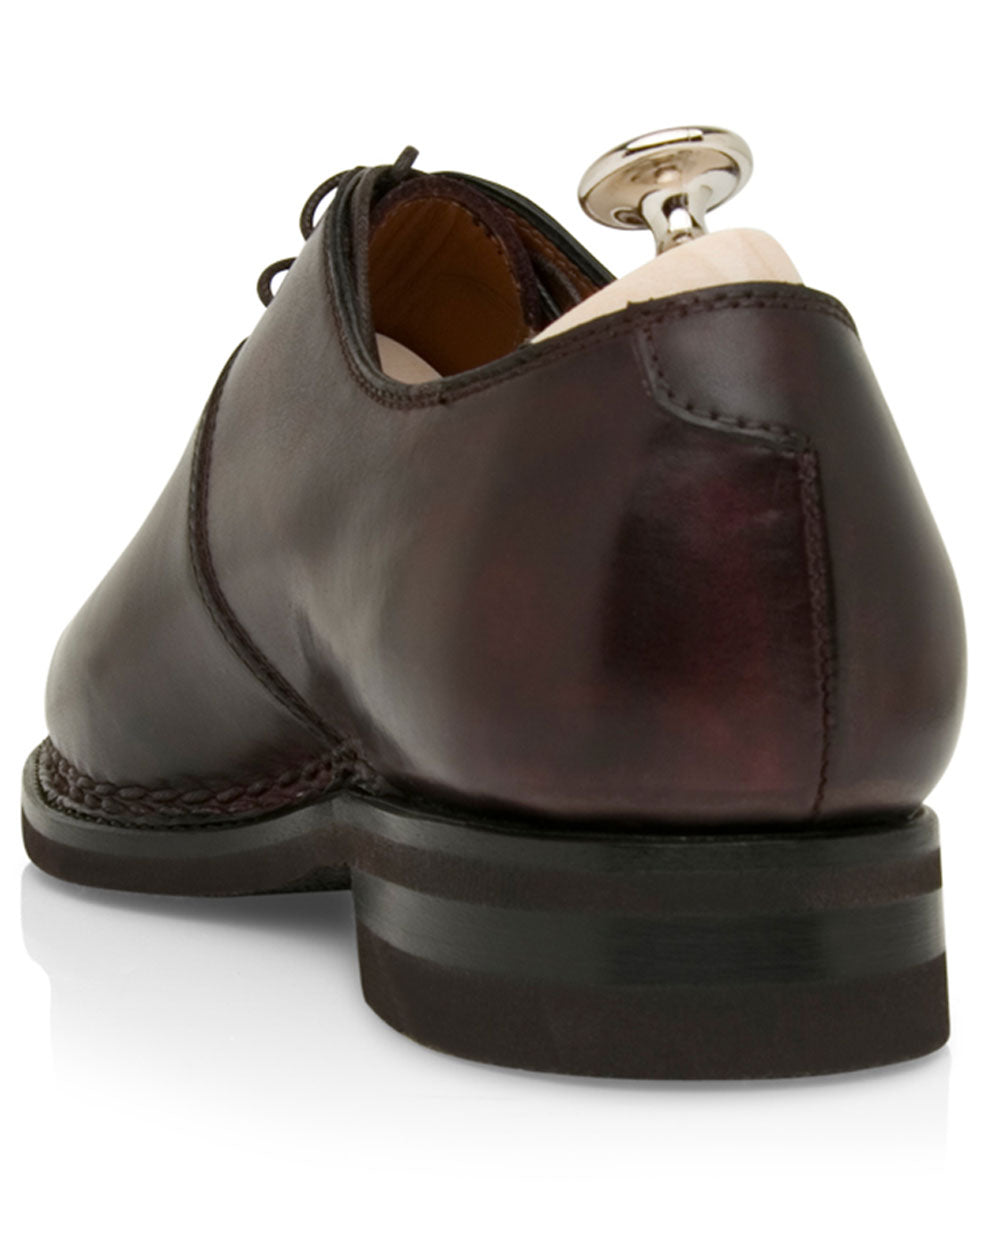 Spaccone Lace Up Dress Shoe in Bordeaux